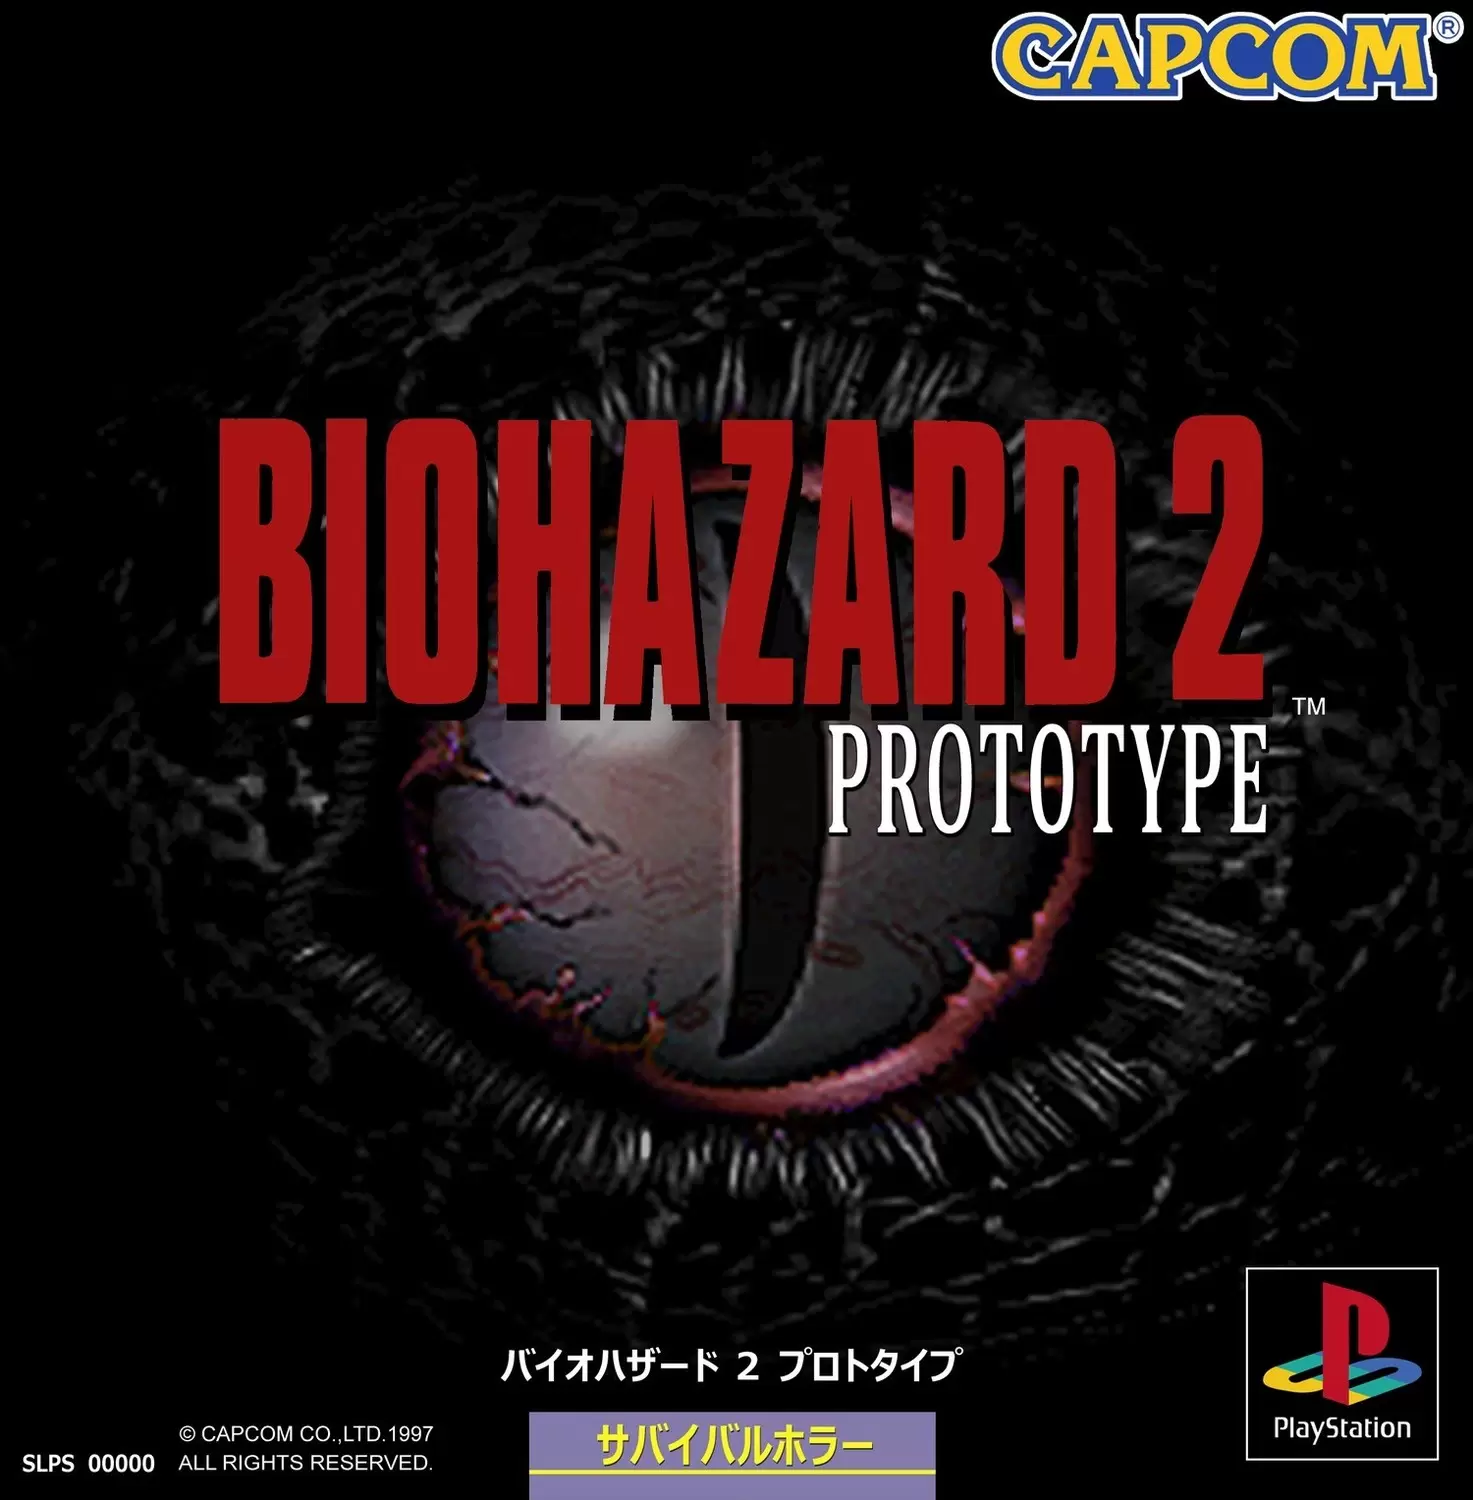 RESIDENT EVIL 5 - PS1 EDITION 